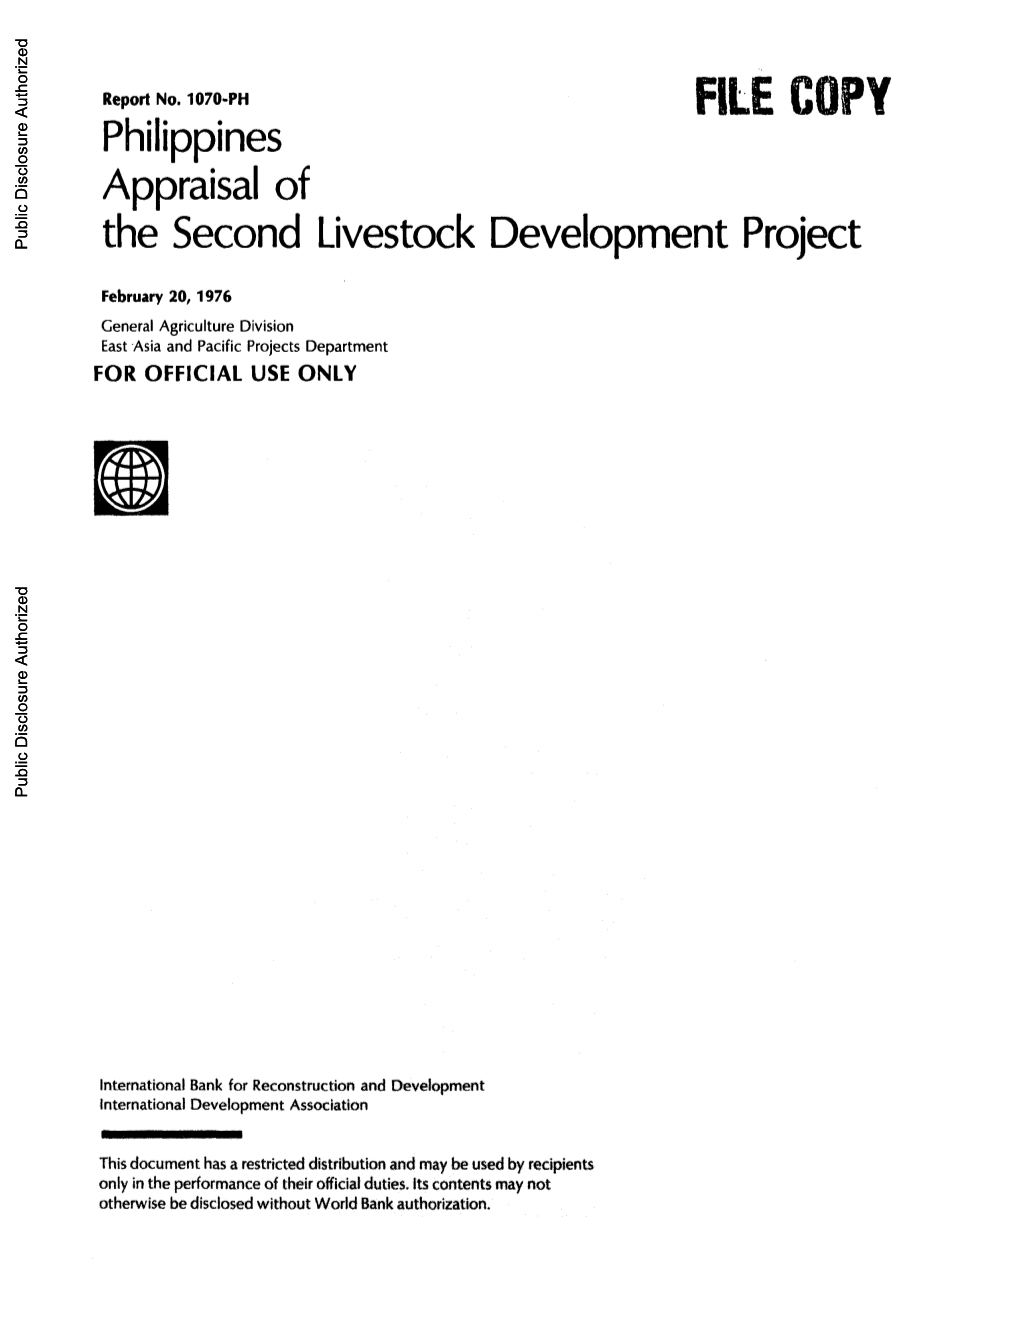 Philippines Appraisal of the Second Livestock Development Project